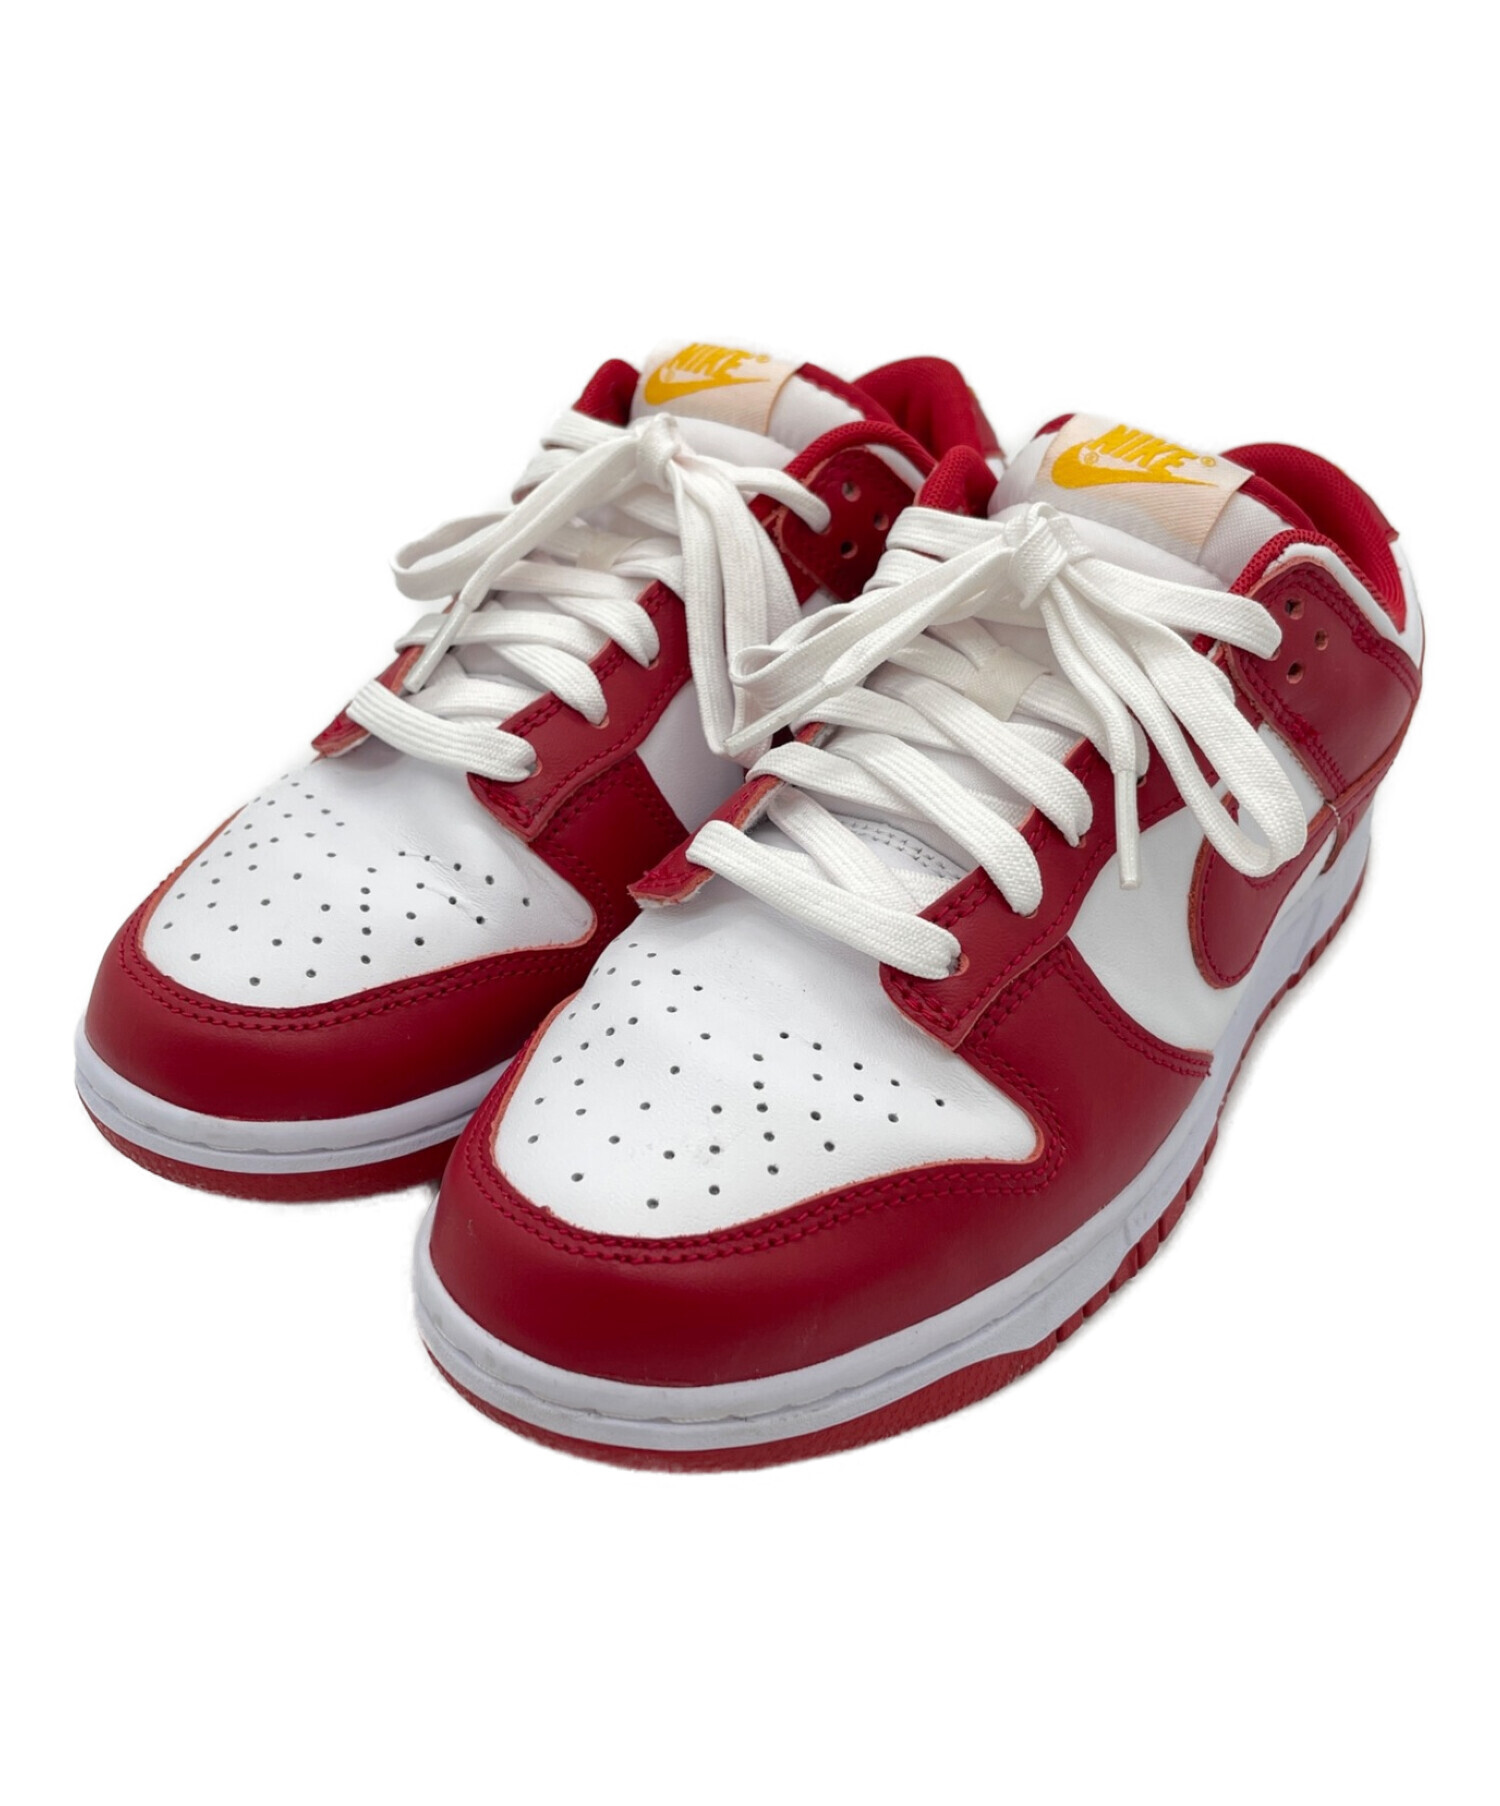 NIKE DUNK LOW RETRO GYMRED ナイキダンク